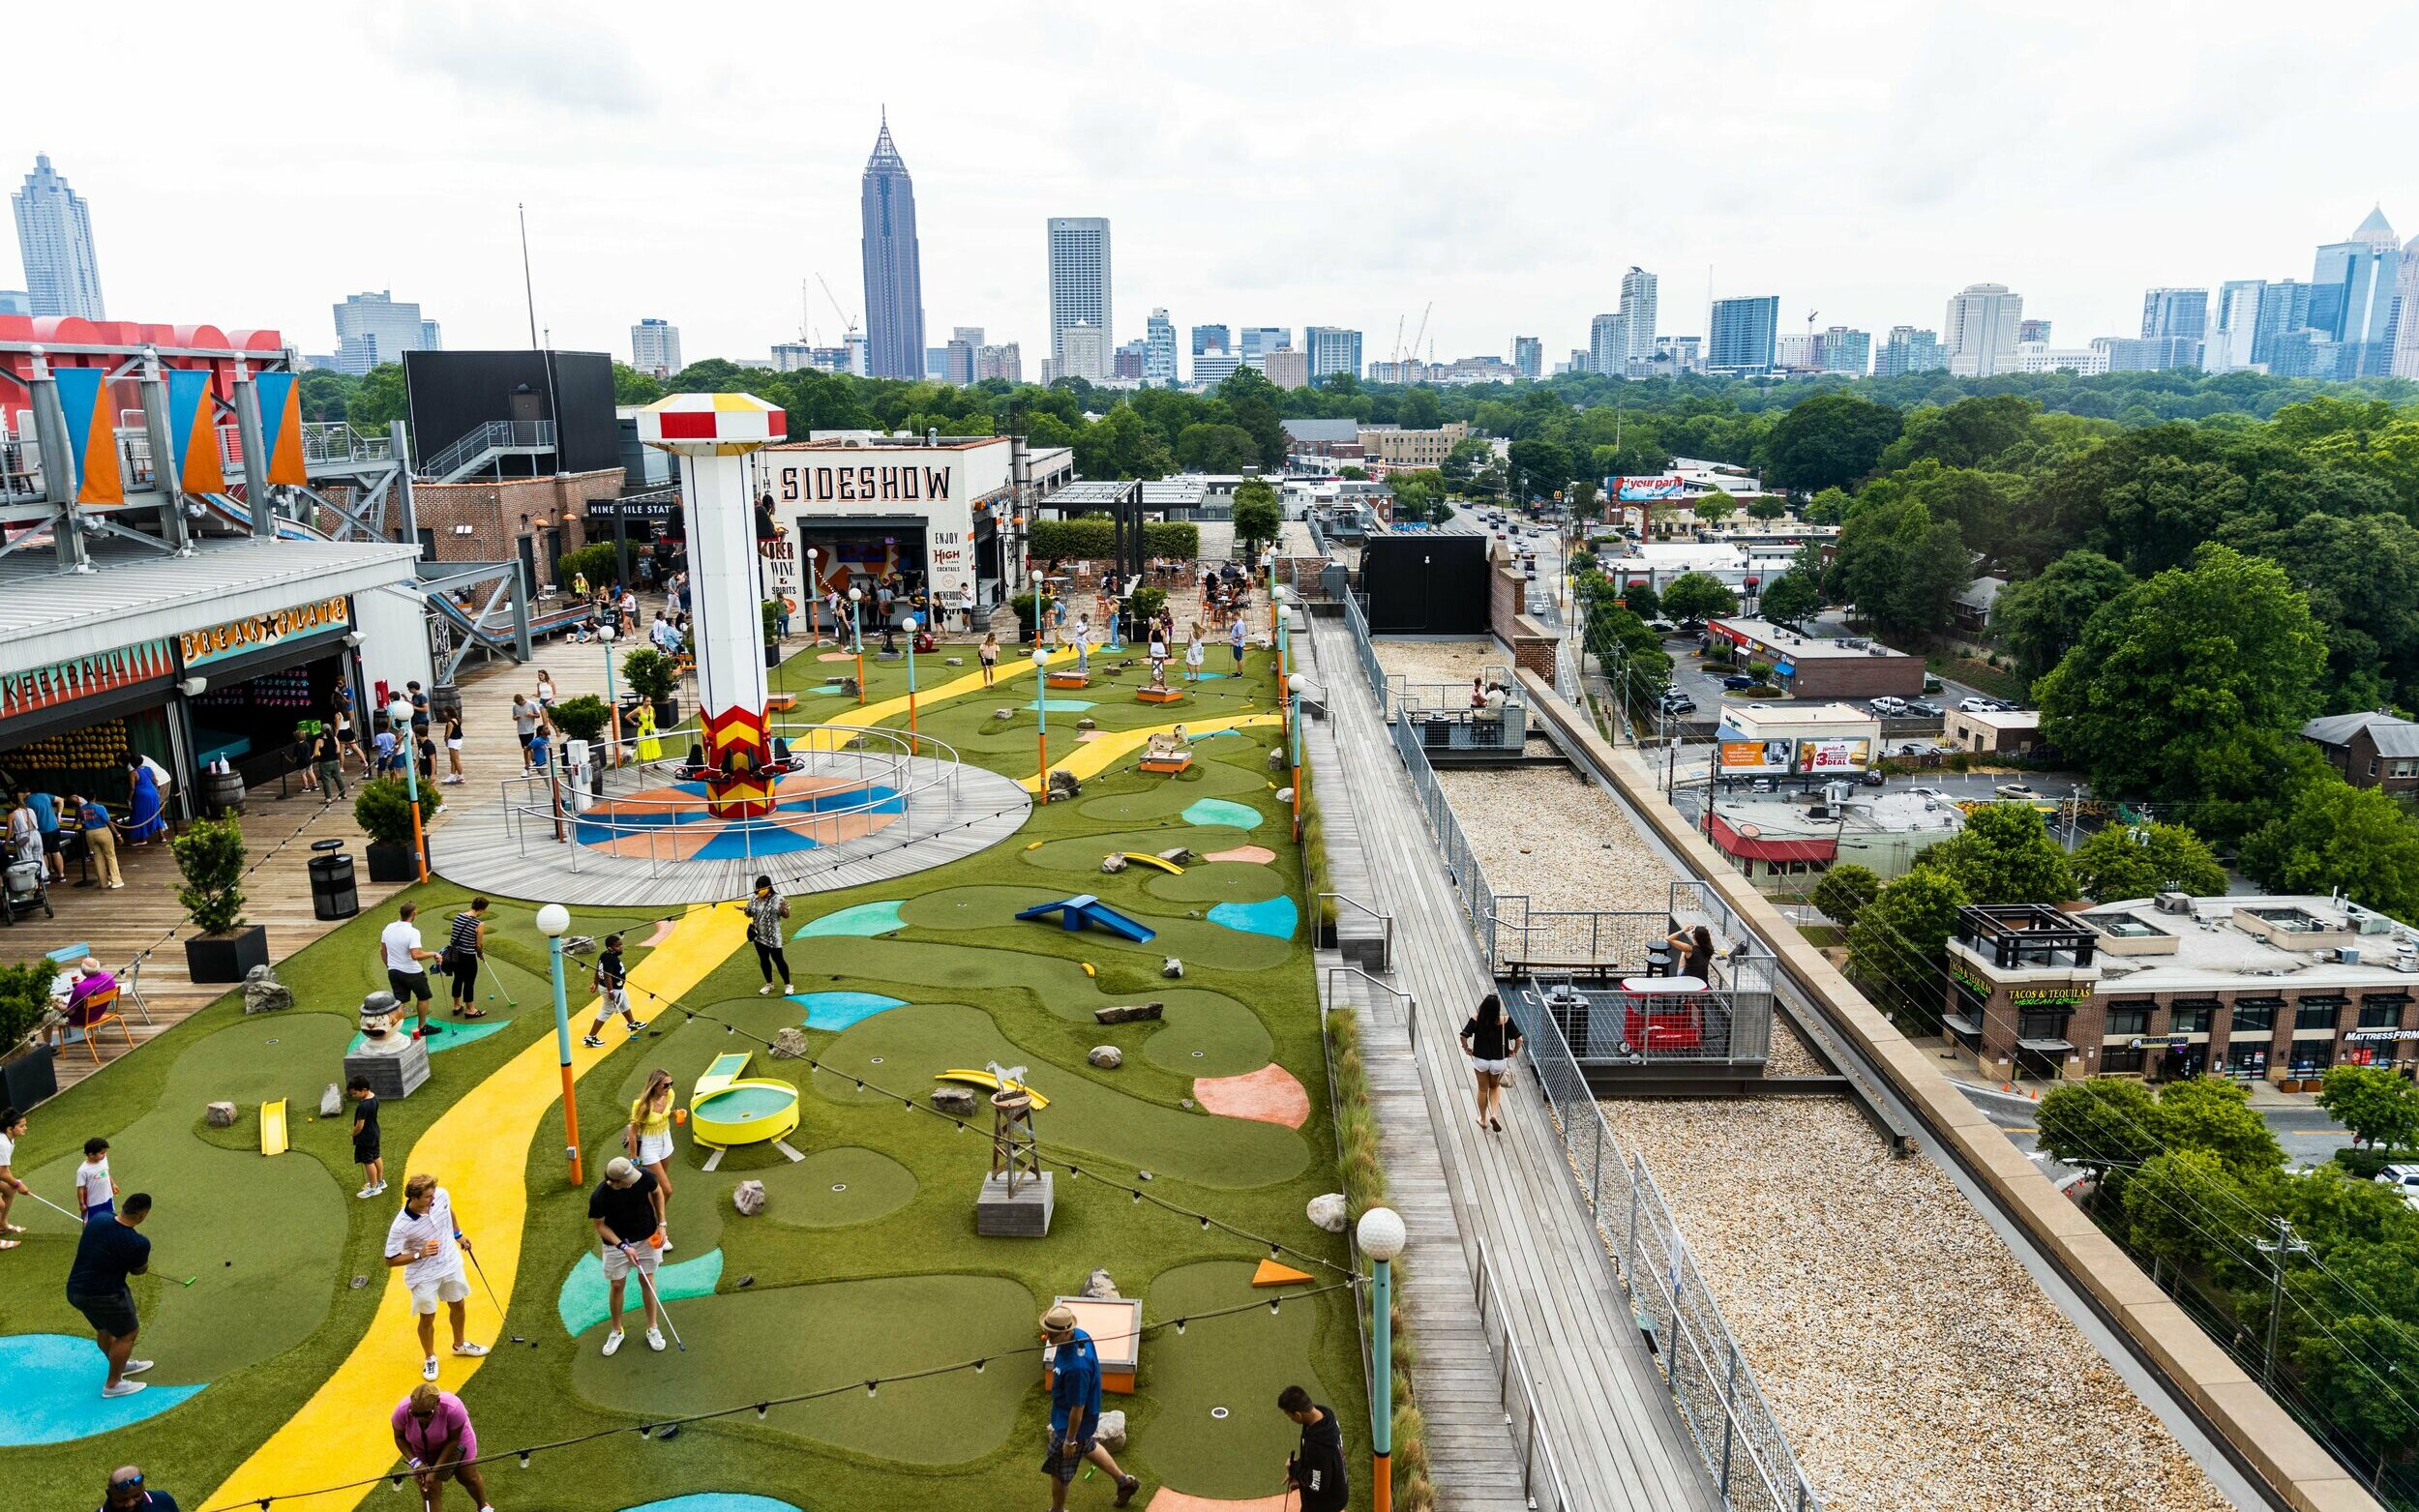 9 Mile Station unique outdoor Atlanta venue and rooftop with bar and mini golf and games